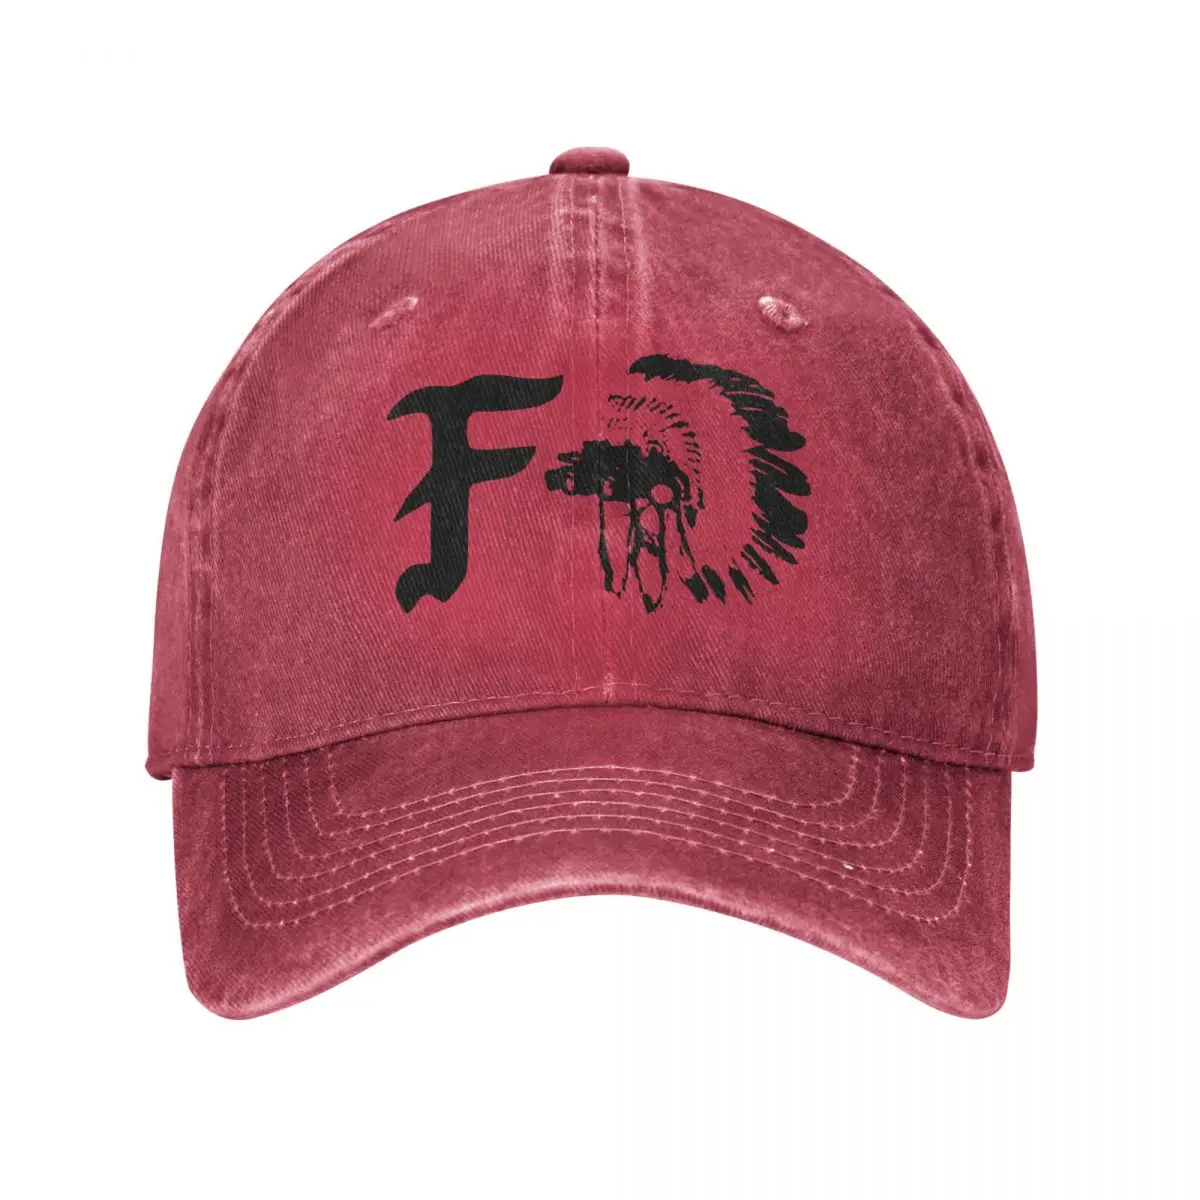 

FOG Forward Observations Group Baseball Cap Distressed Washed Hats Cap Vintage Outdoor Running Golf Unstructured Soft Sun Cap